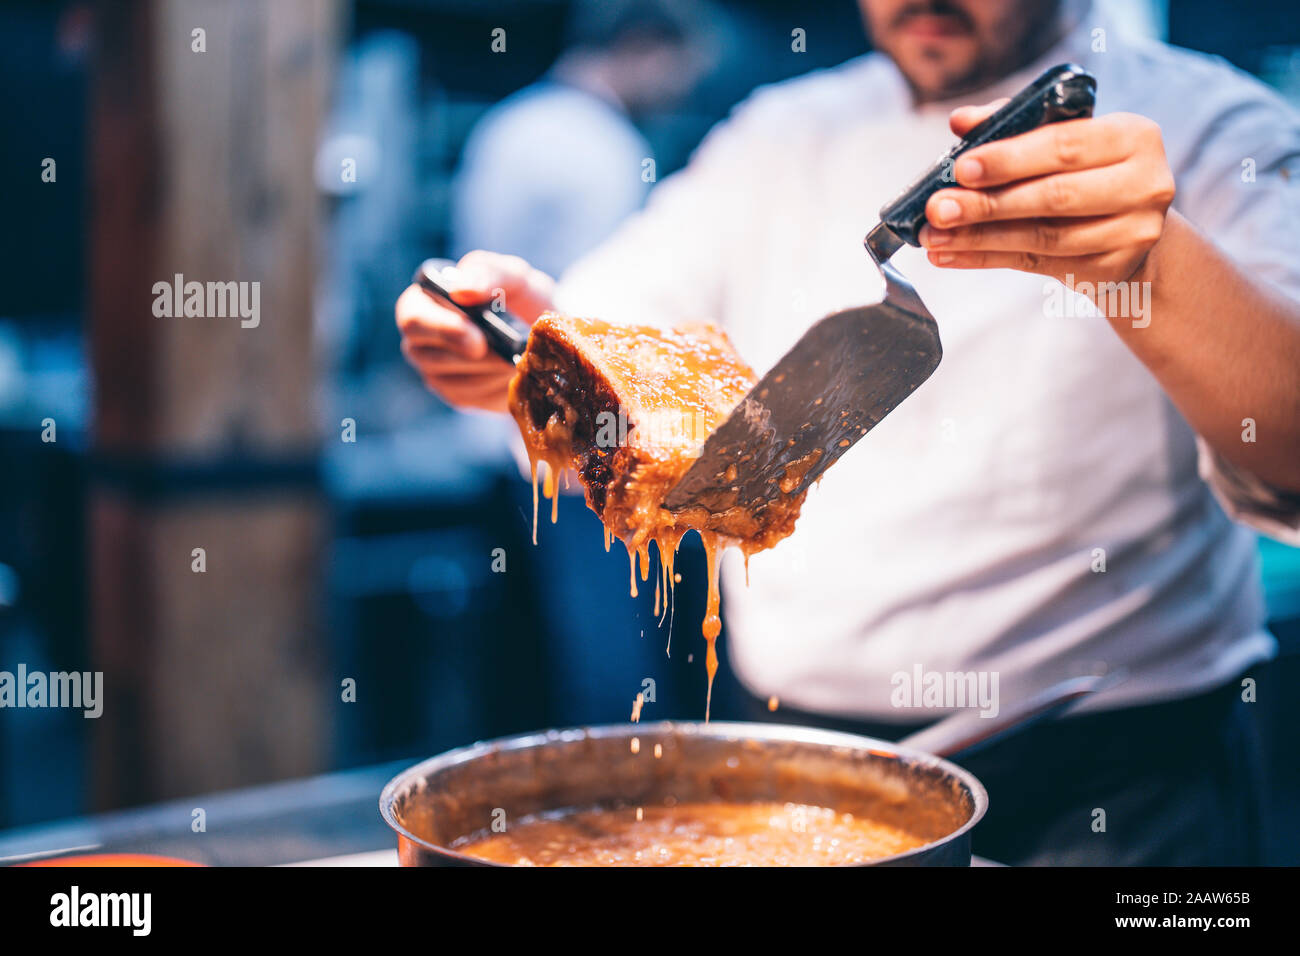 Cook at work in a restaurant kitchen Stock Photo